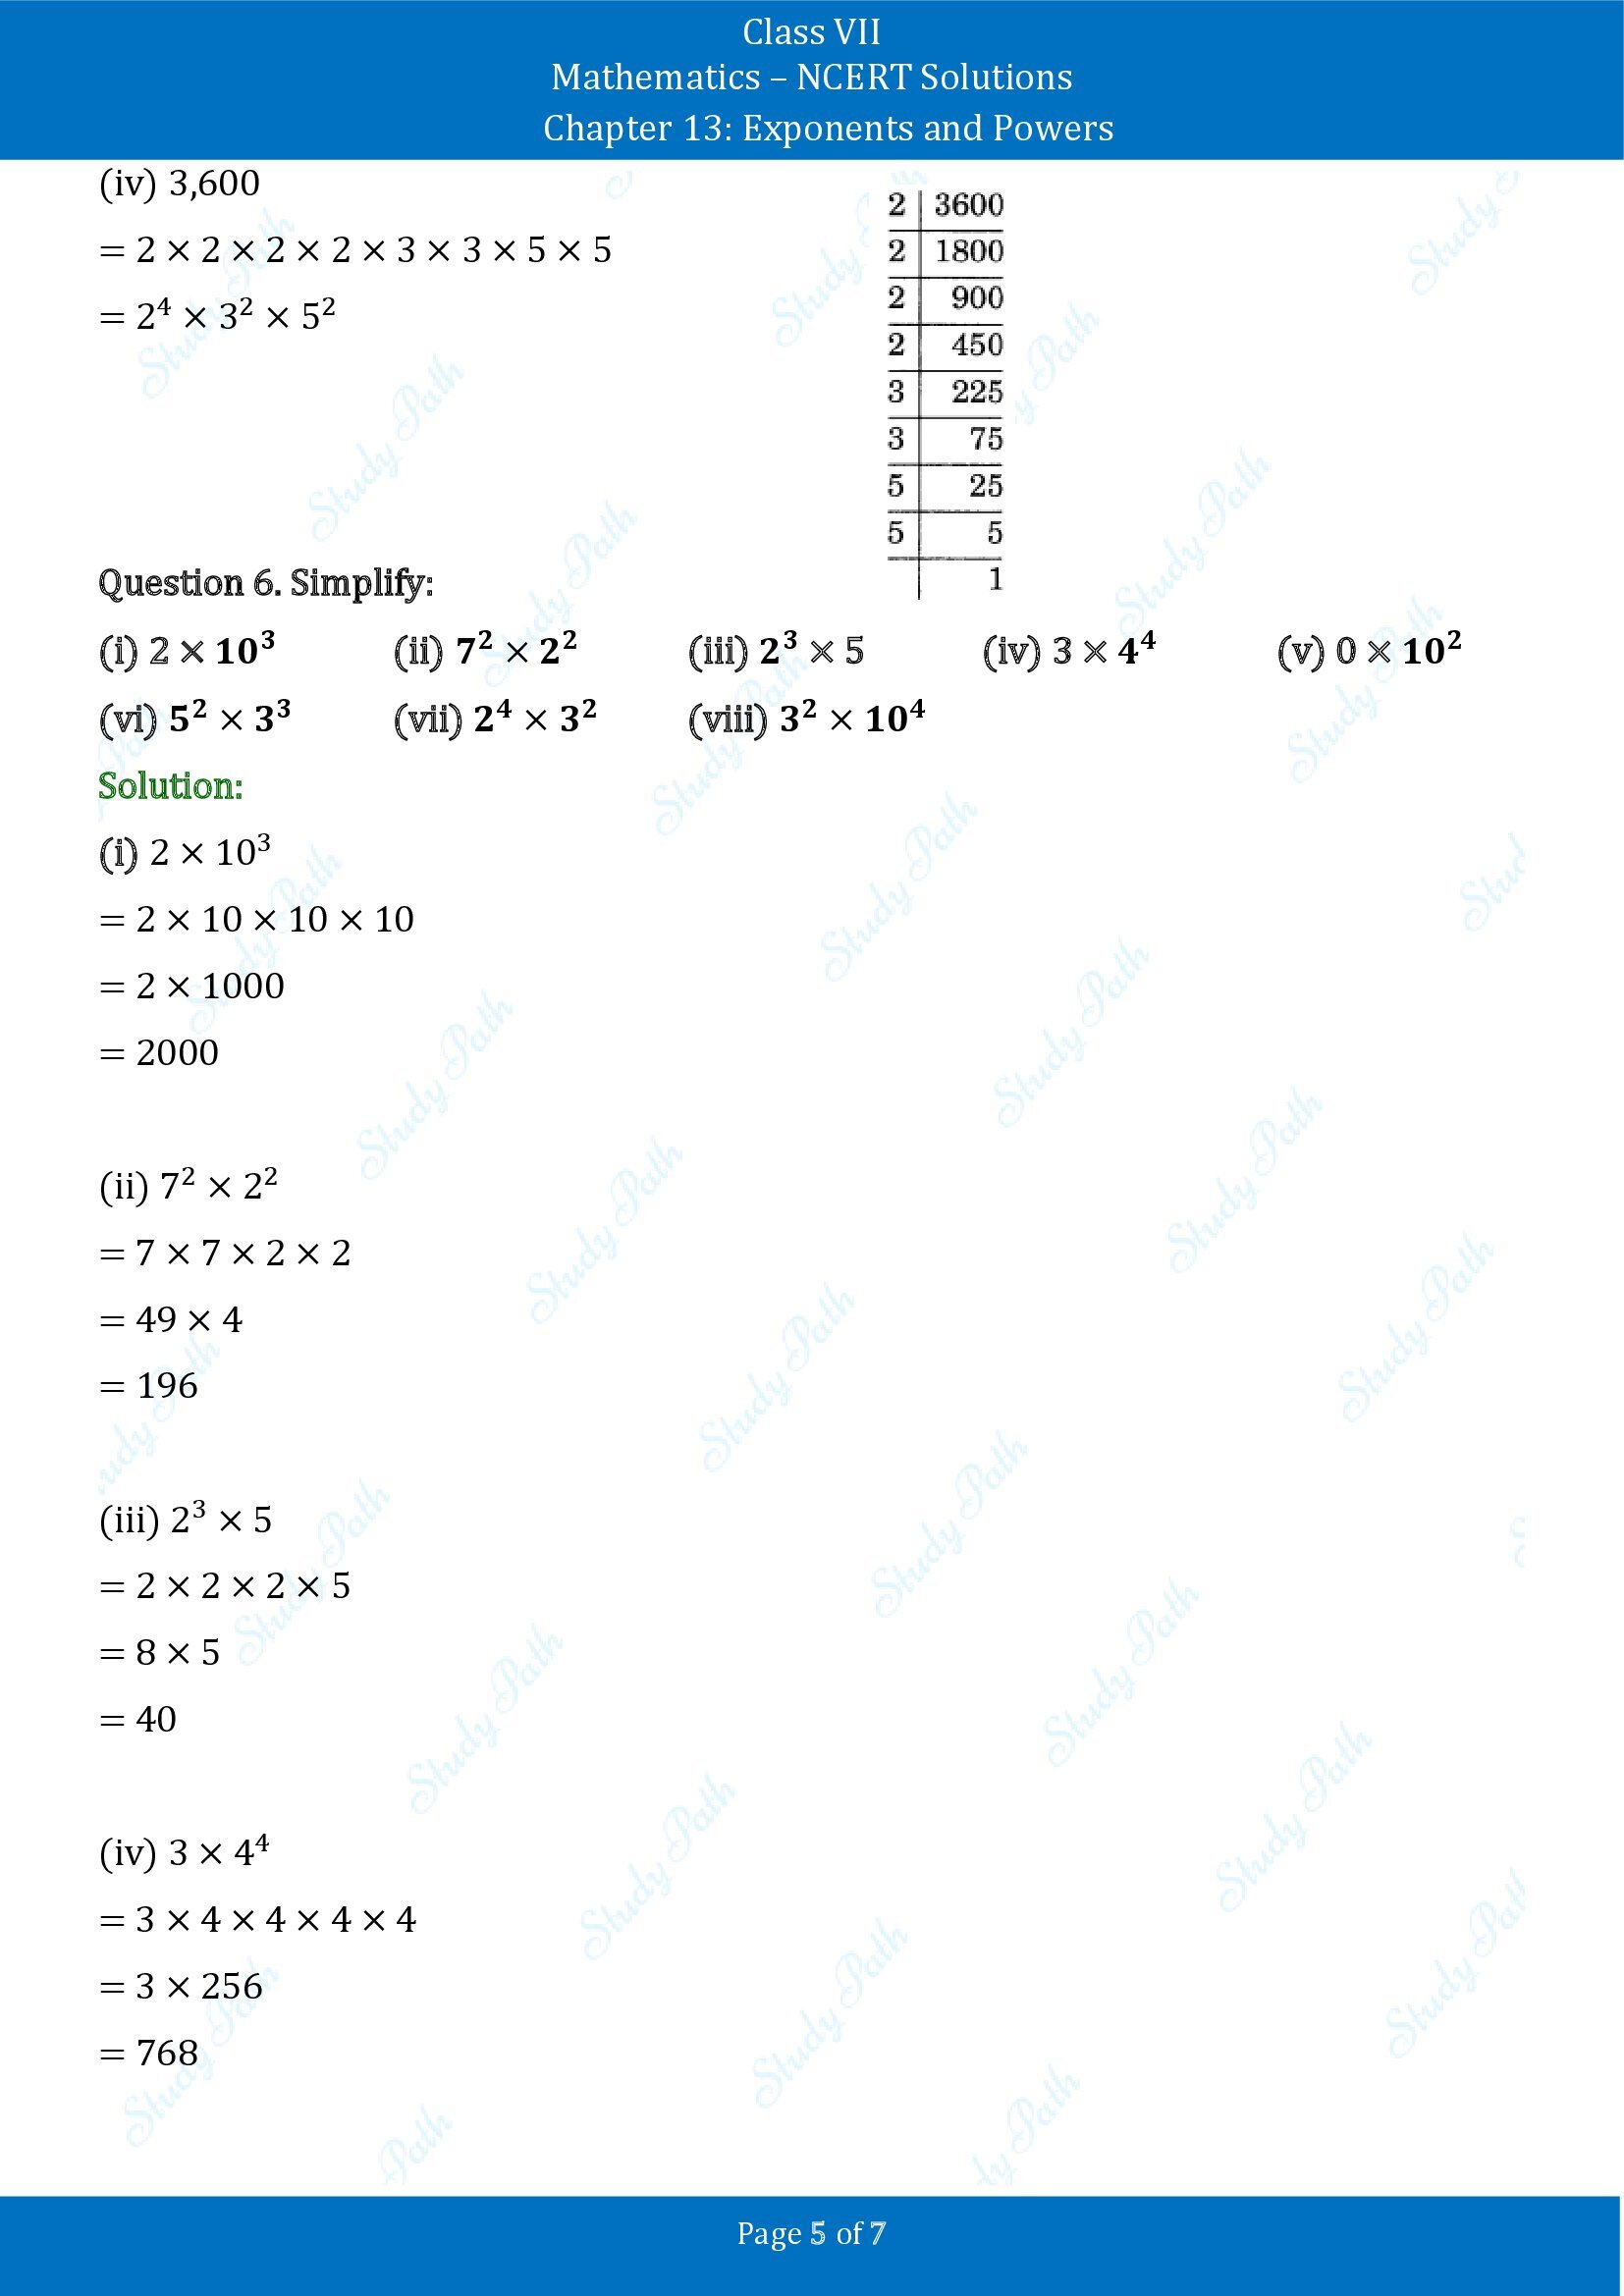 NCERT Solutions for Class 7 Maths Chapter 13 Exponents and Powers Exercise 13.1 00005